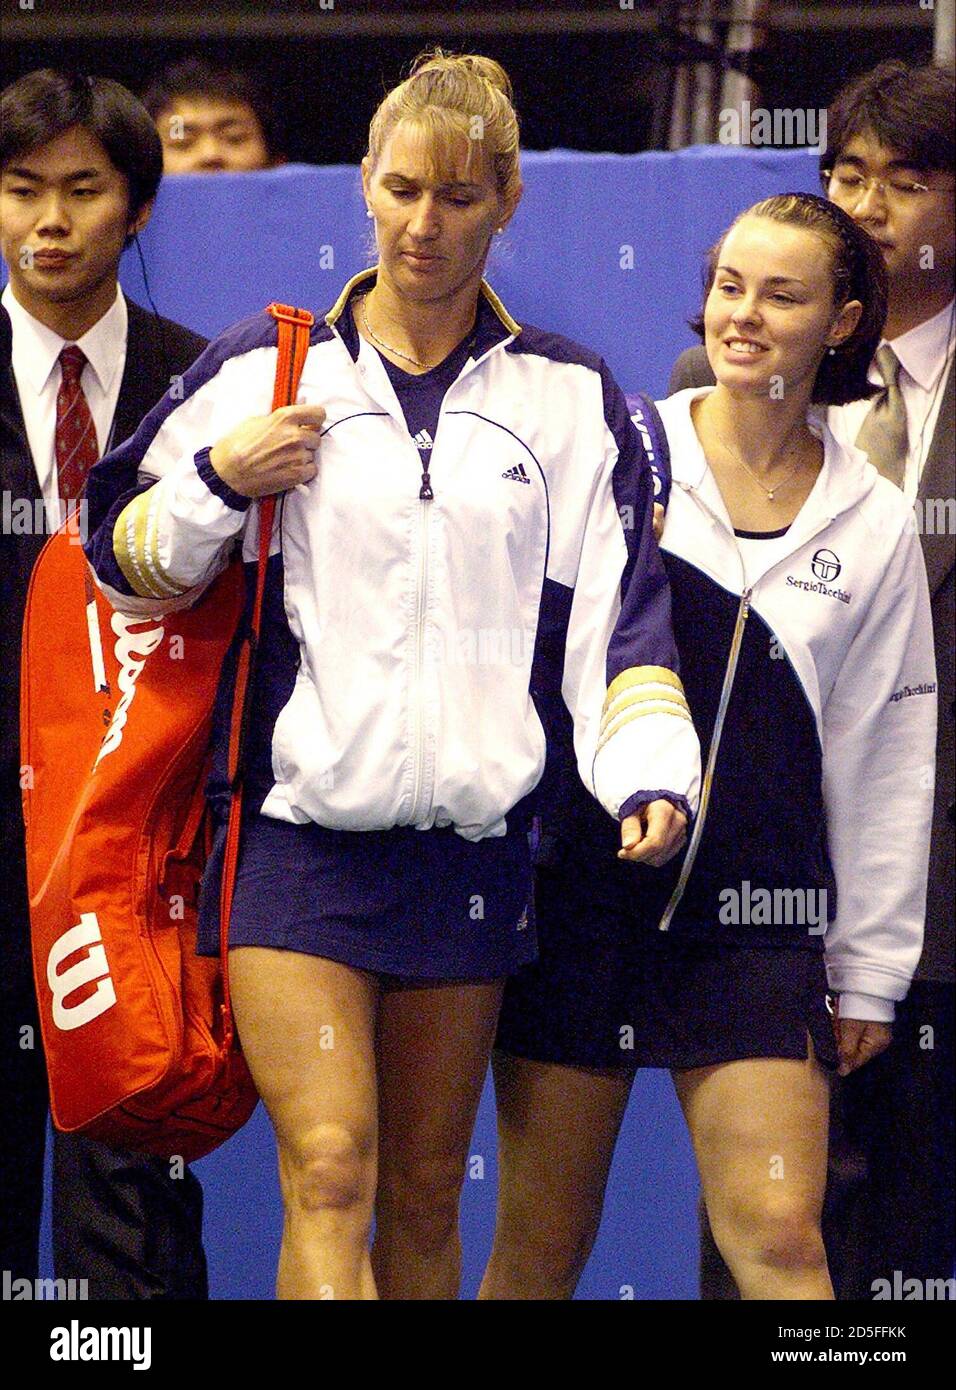 GERMAN STEFFI GRAF APPEARS WITH MARTINA HINGIS FOR THEIR QUARTERFINALS IN  PAN PACIFIC TENNIS TOURNAMENT IN TOKYO. German tennis star Steffi Graf (L)  appears at the centre court with Australian Open champion